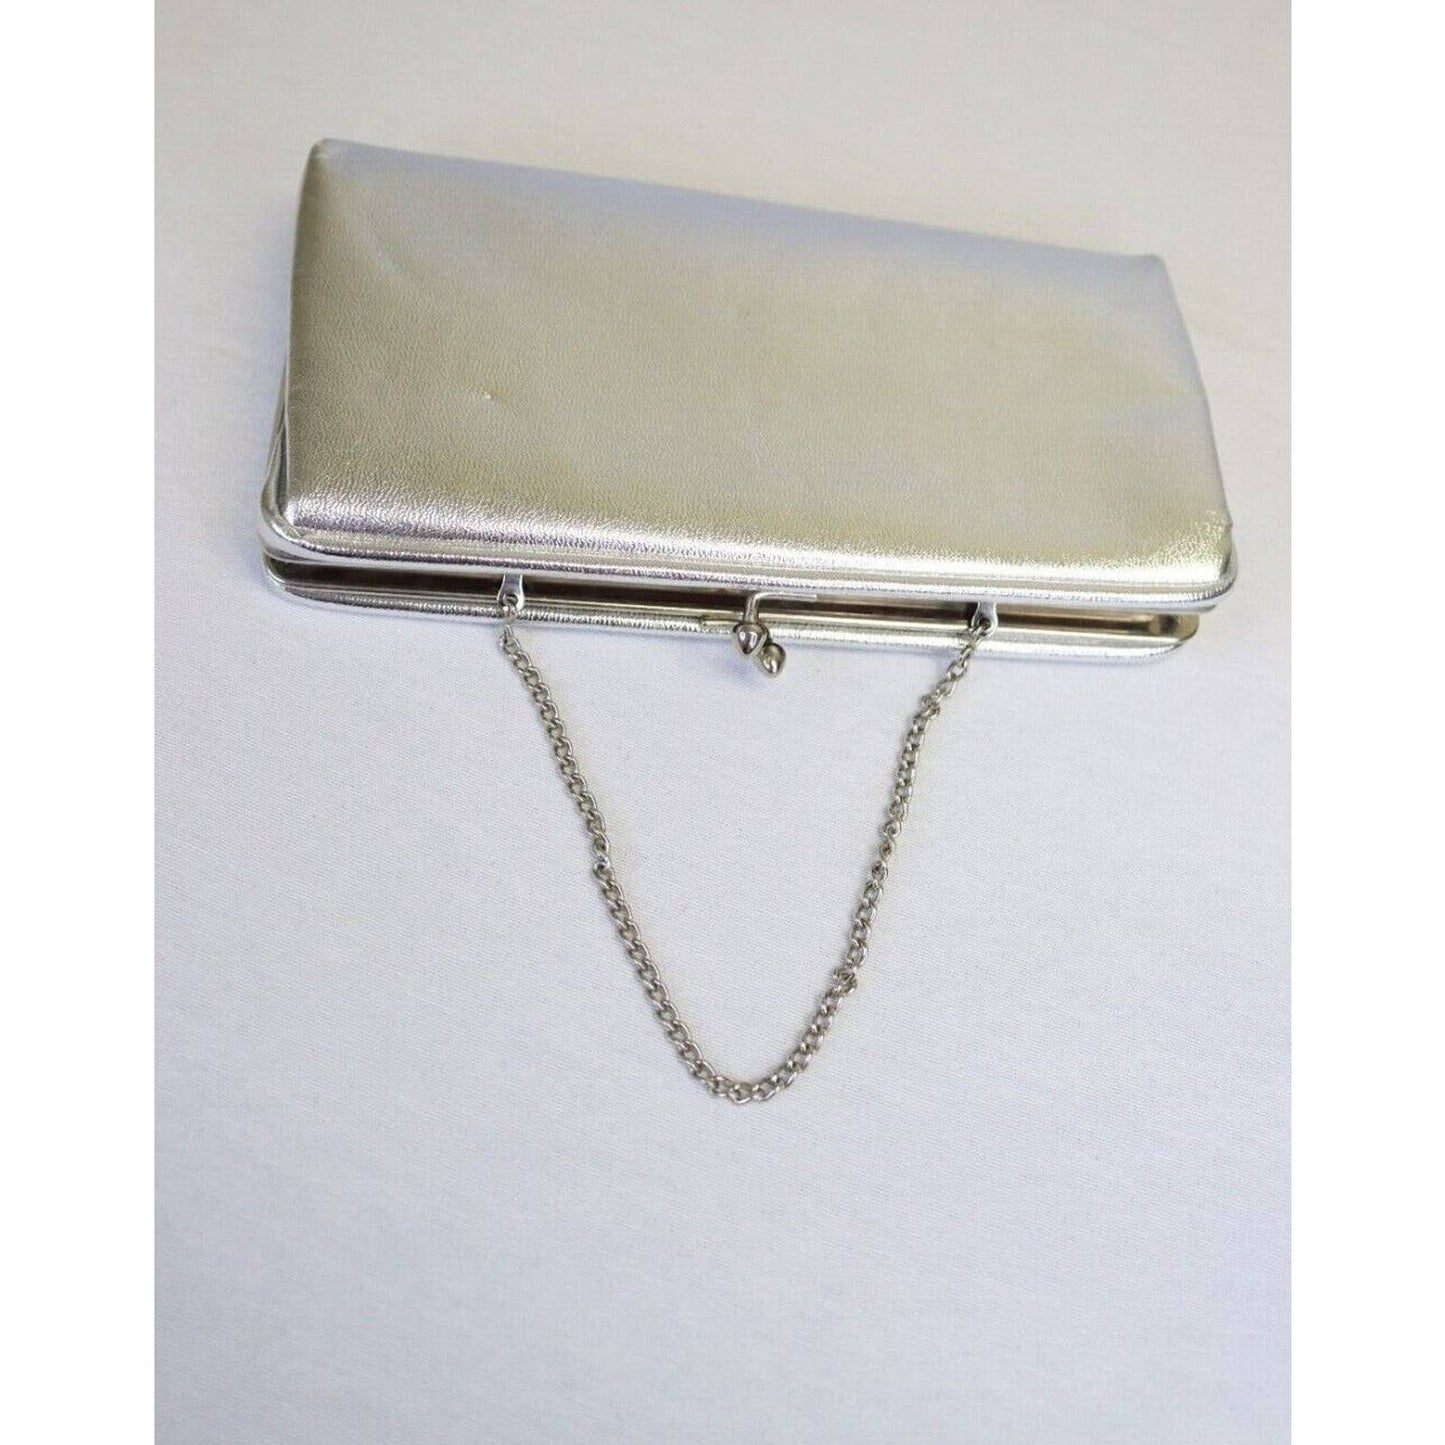 Vintage Ande Silver Clutch With Chain Handle Hand Bag Purse